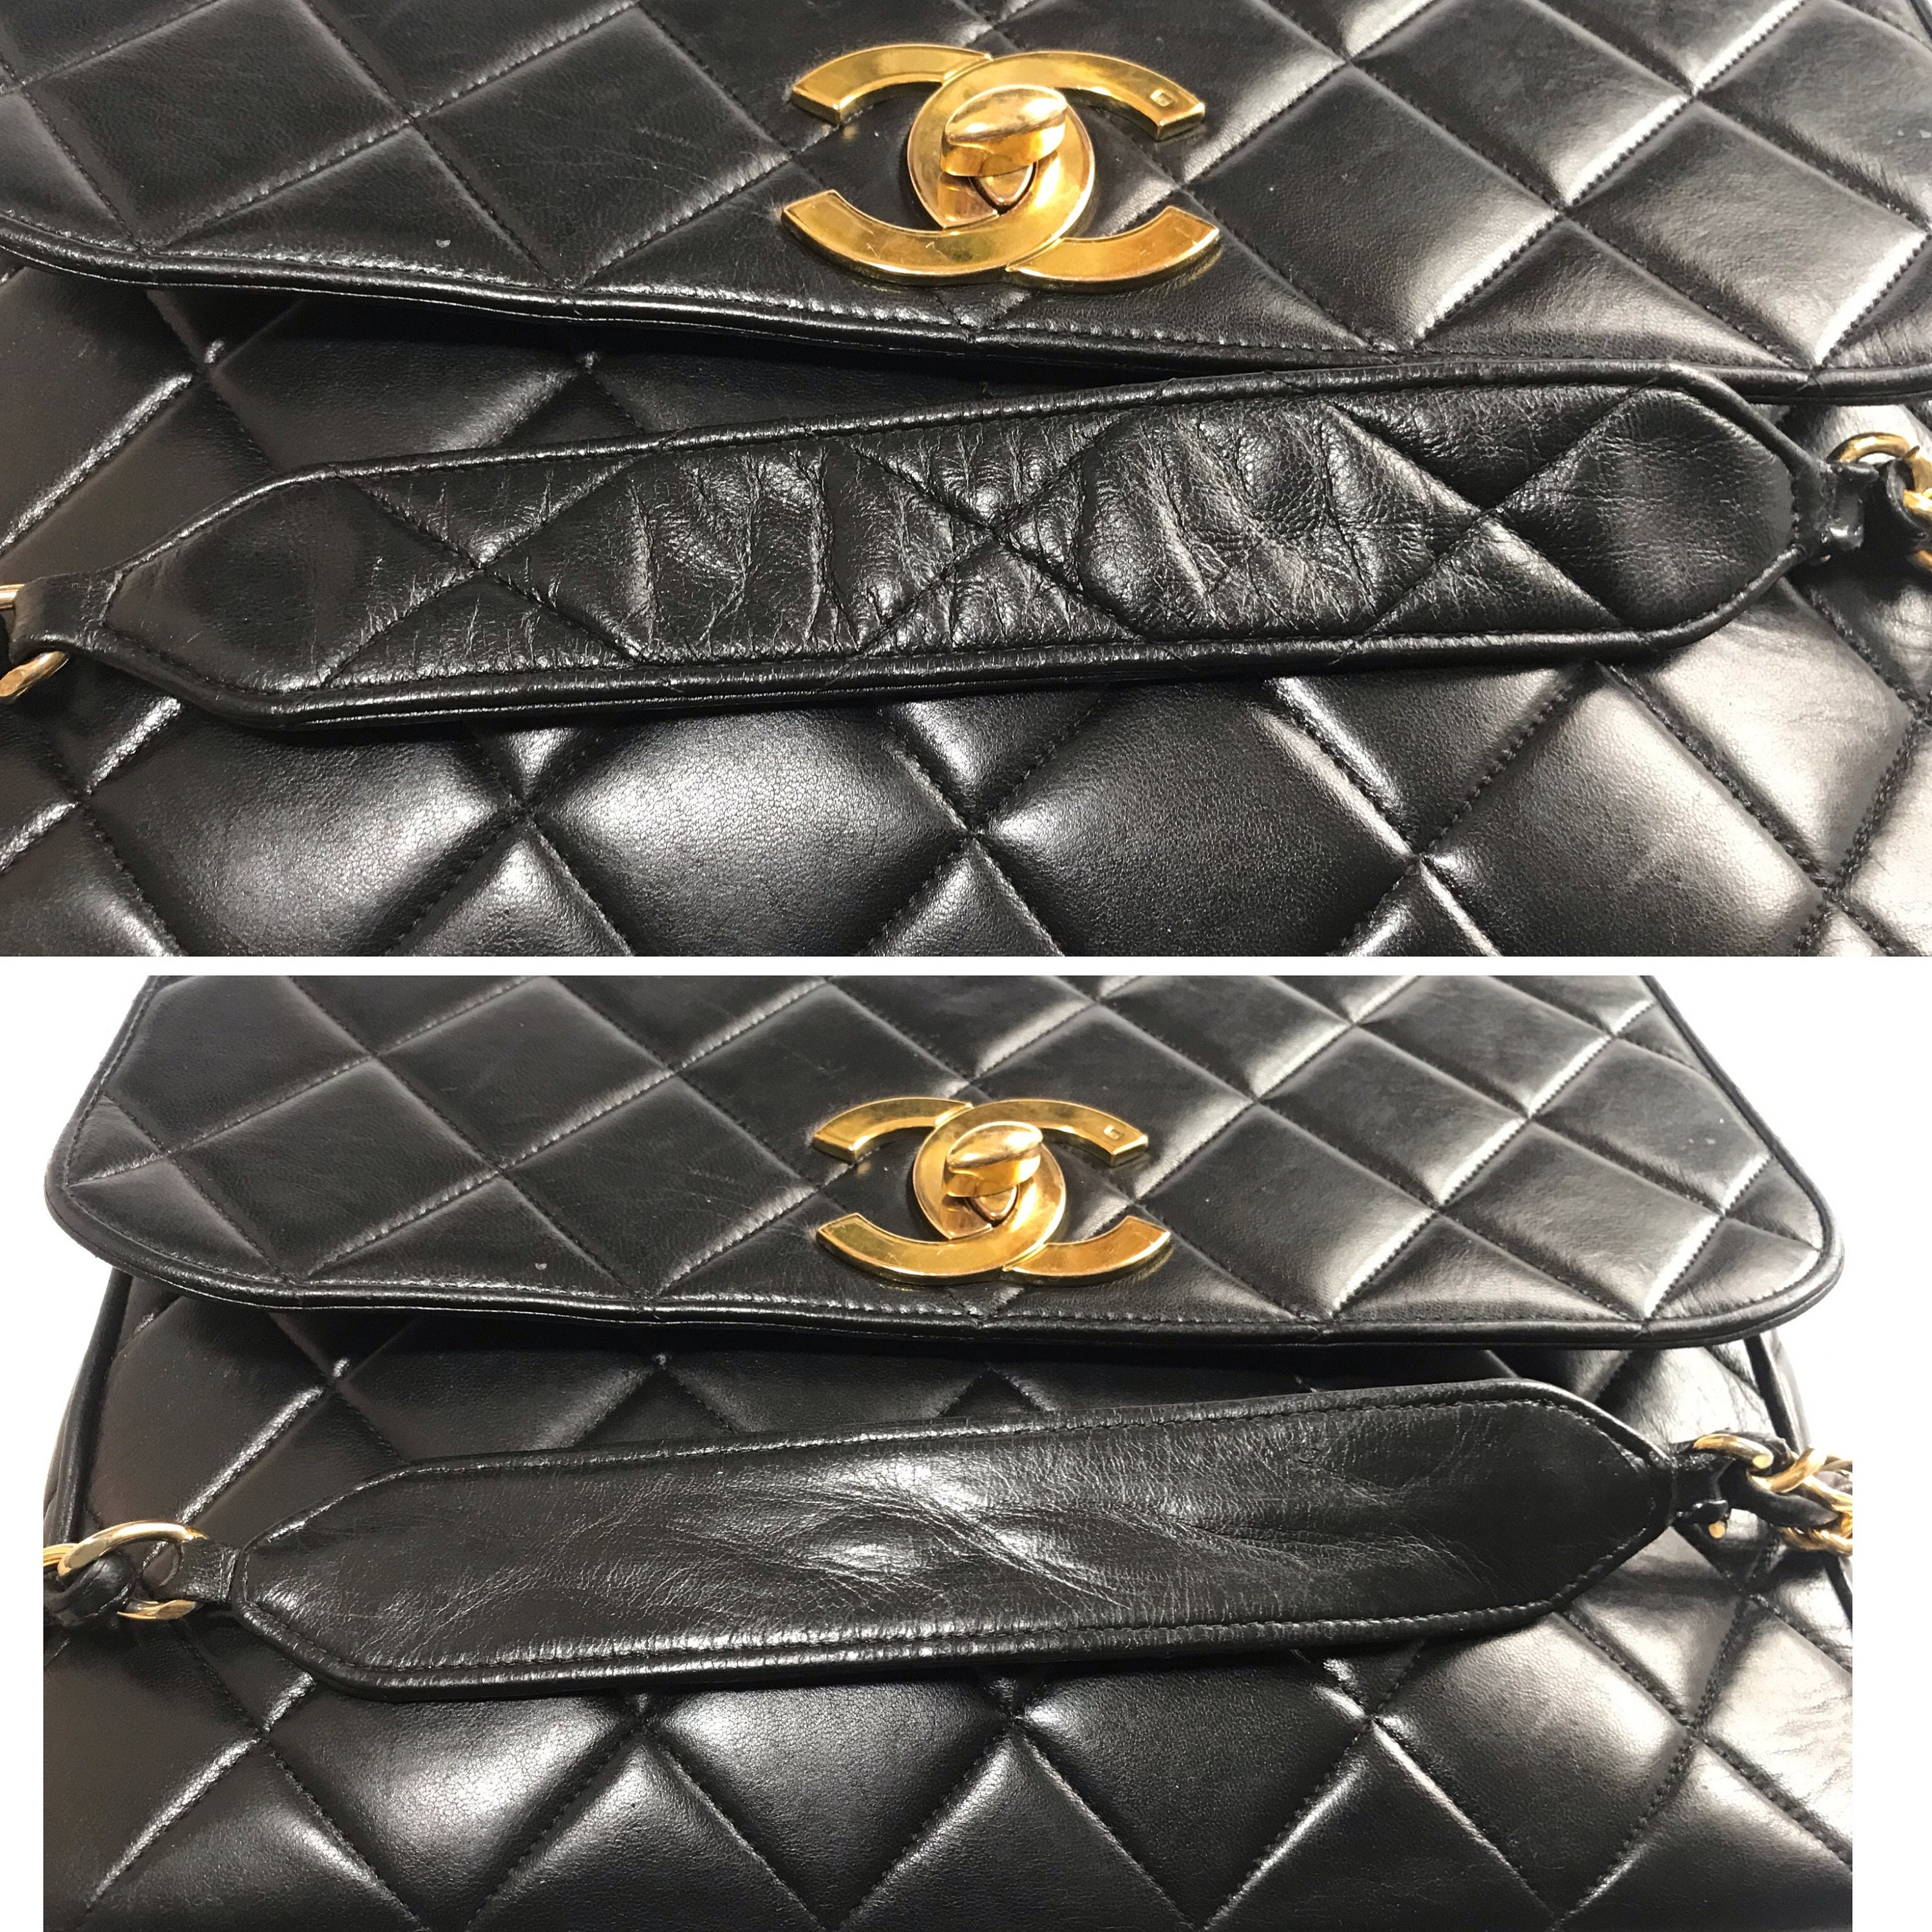 Chanel Vintage Black Lambskin 2.55 Chain Classic Flap Bag ○ Labellov ○ Buy  and Sell Authentic Luxury